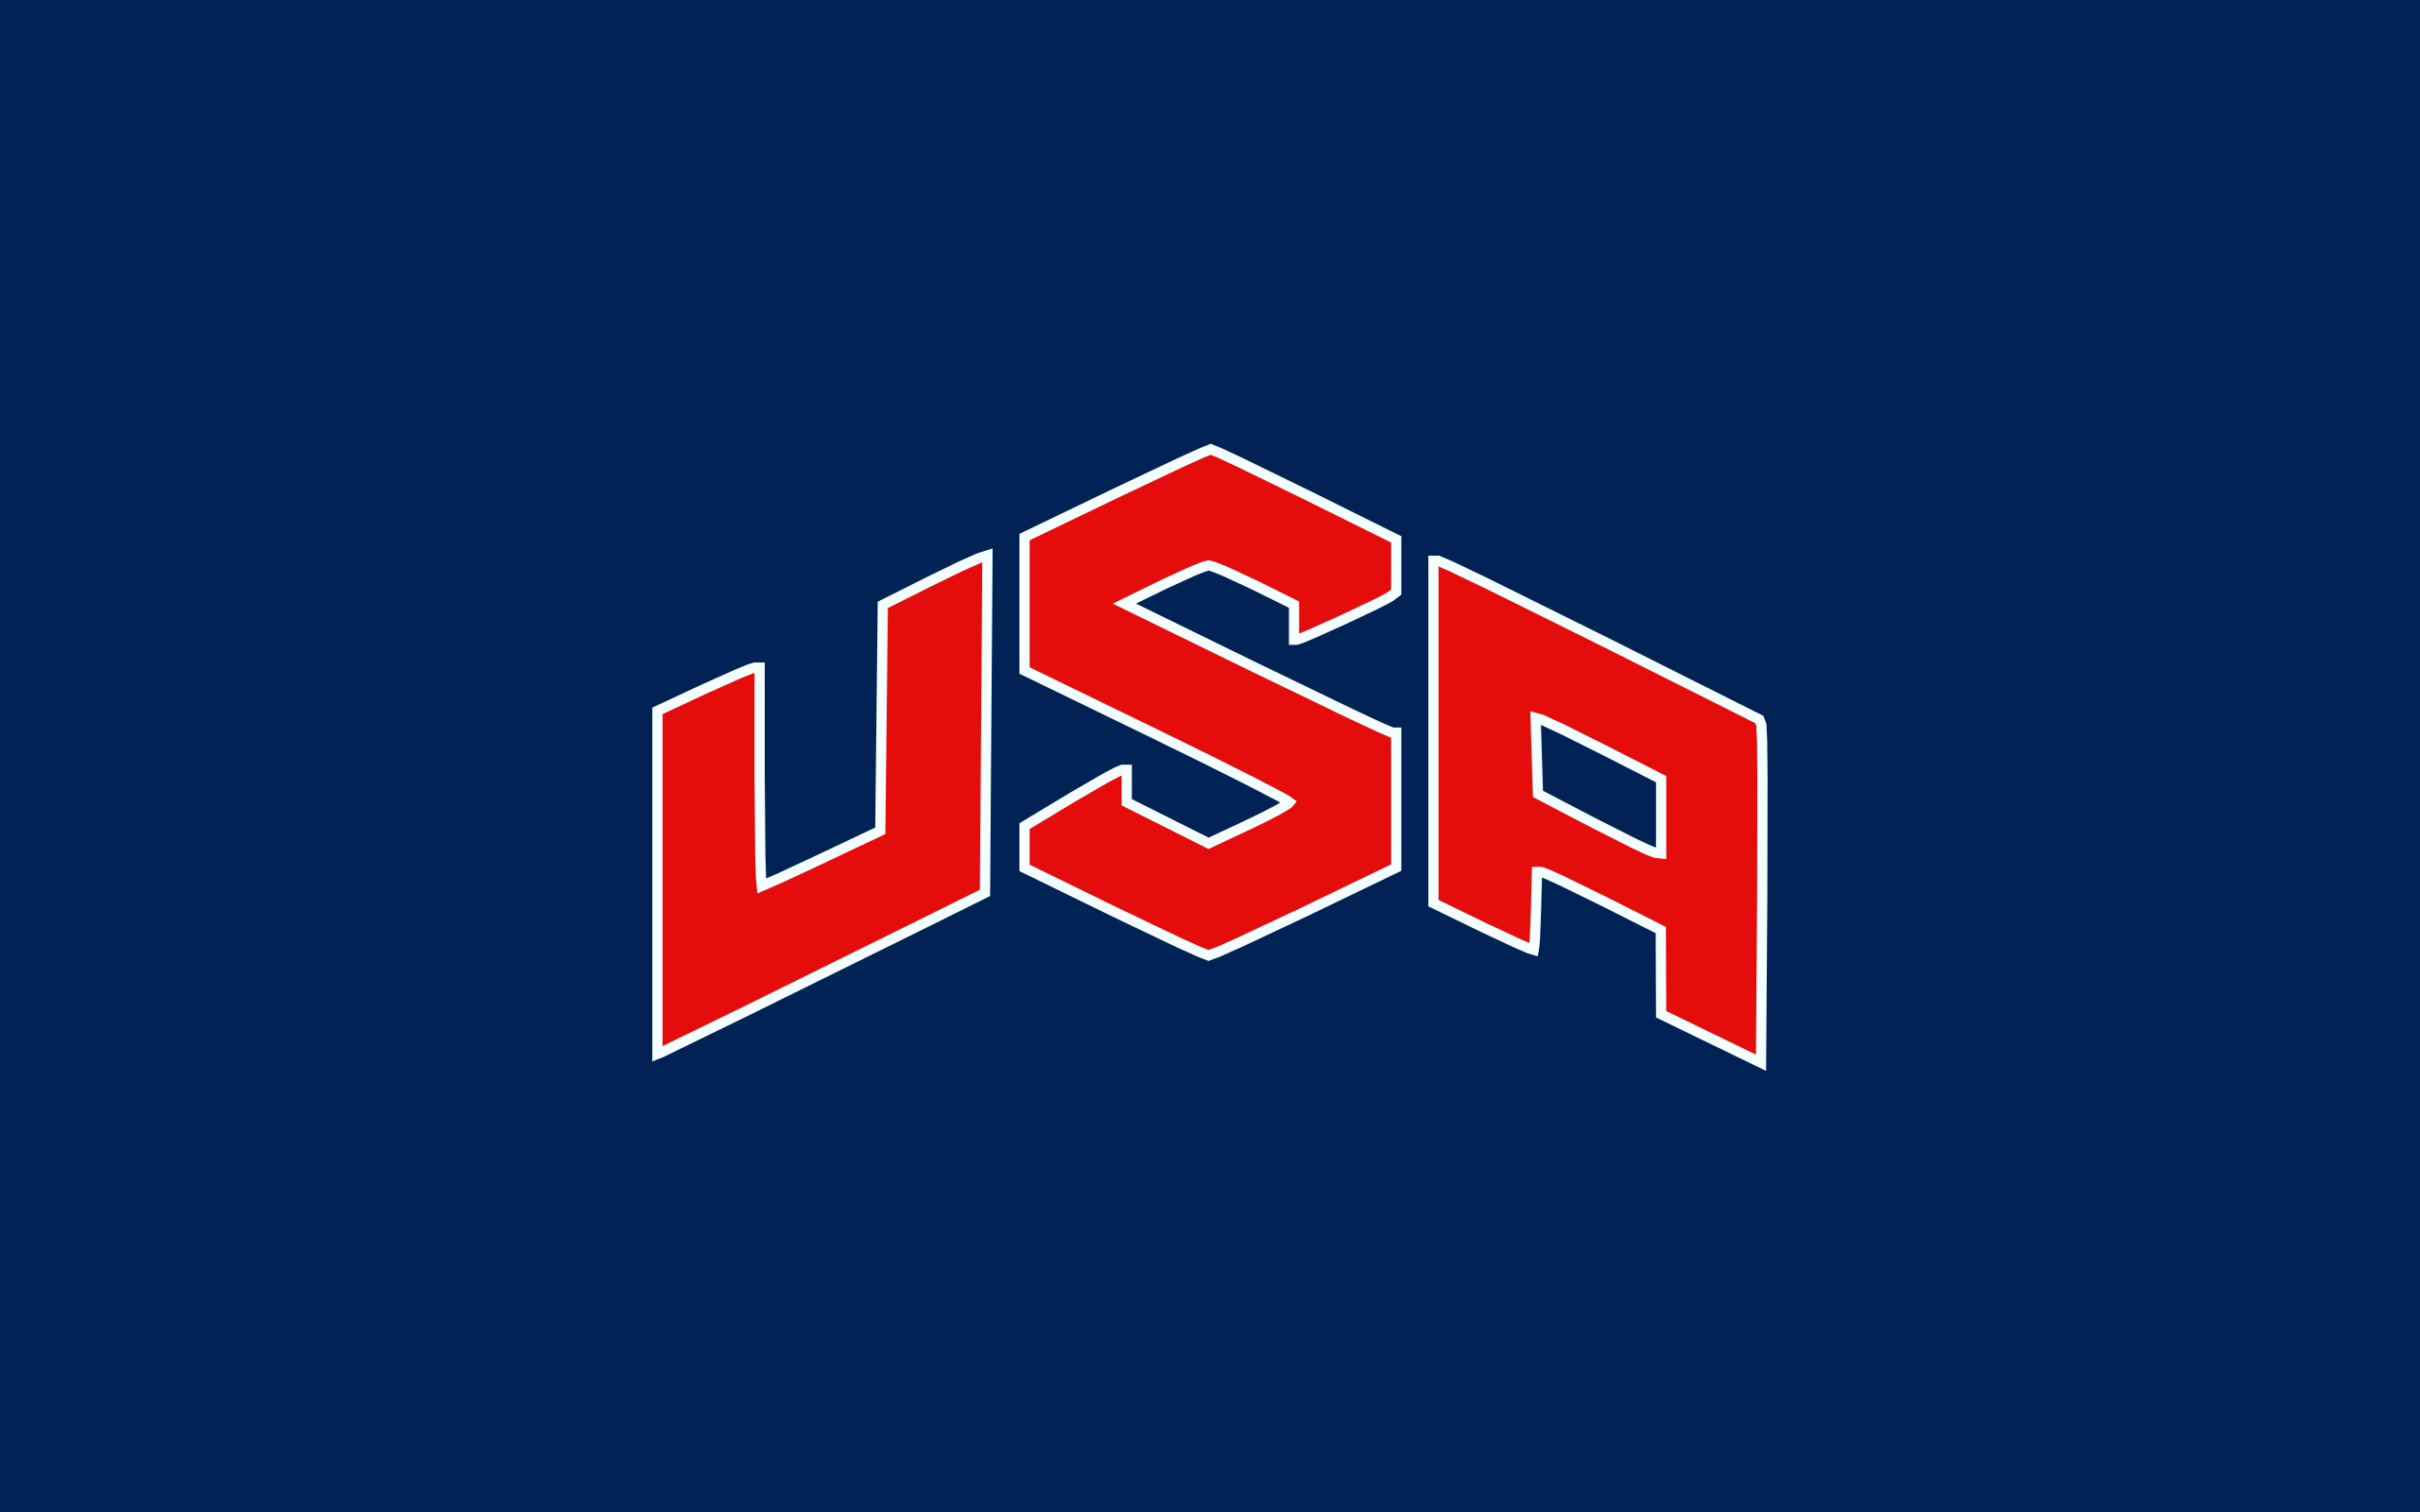 Cool Wallpapers Of Usa Soccer Logo  Wallpaper Cave